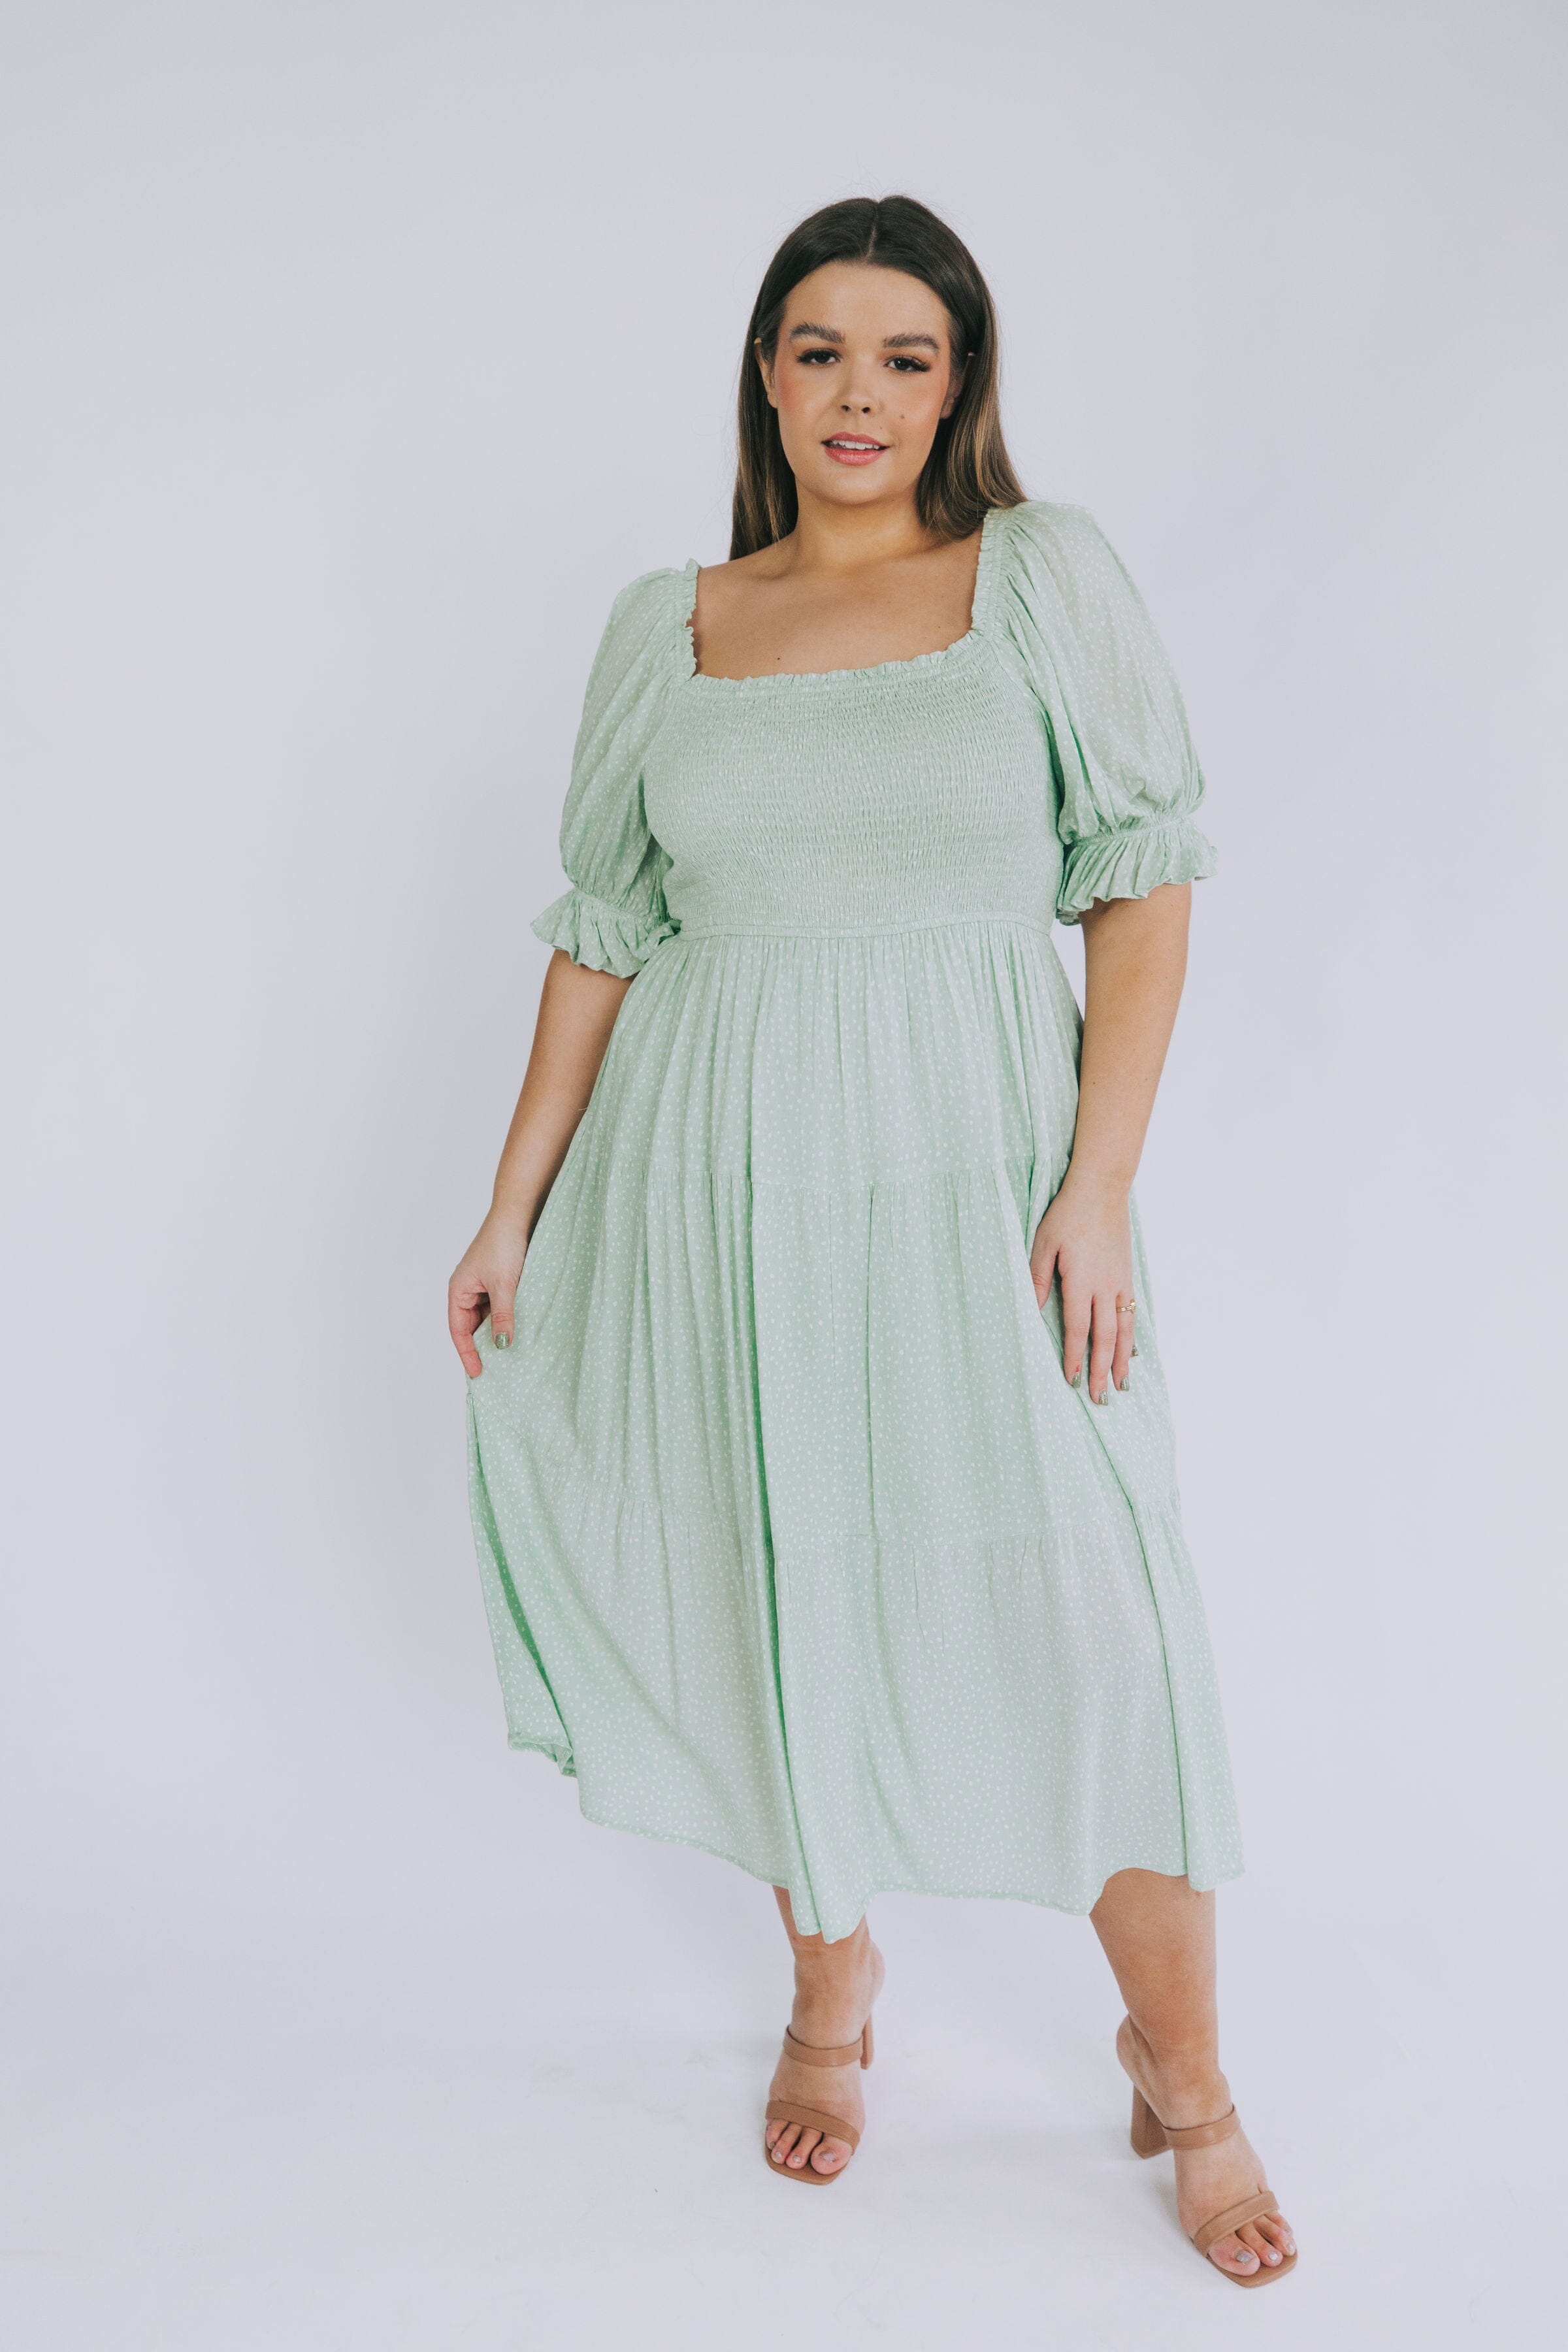 PLUS SIZE - Fall For You Dress